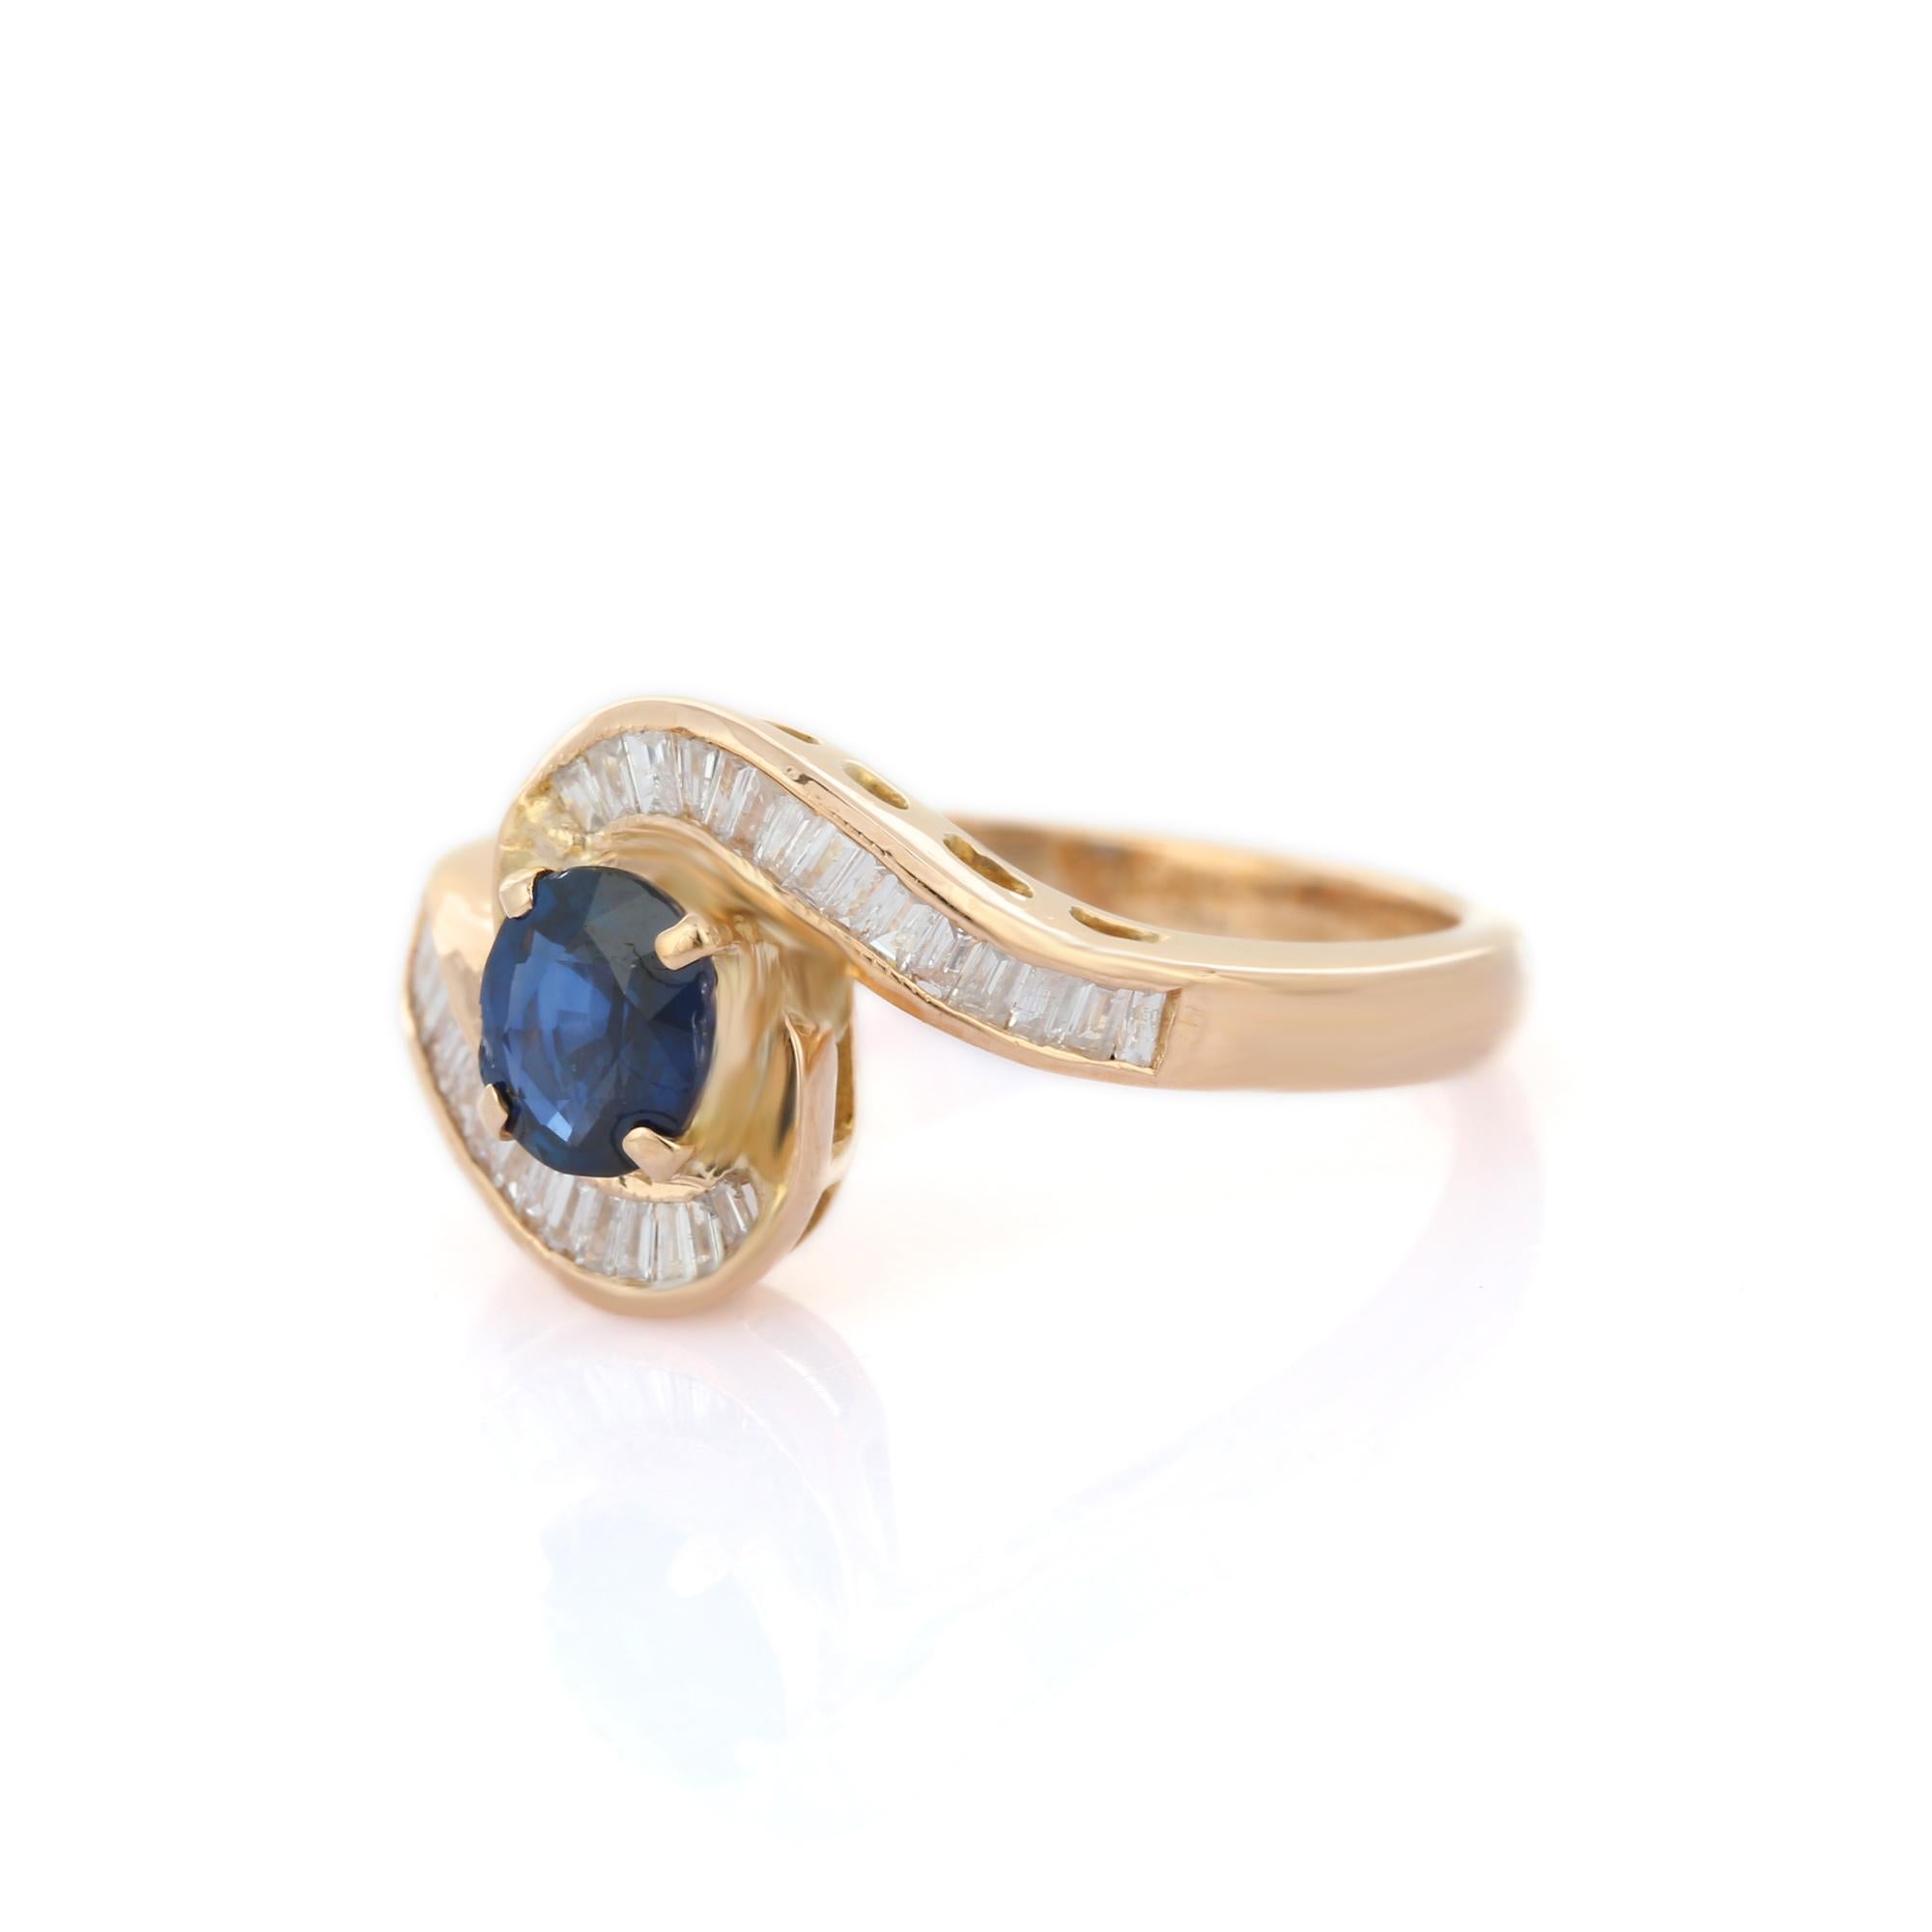 For Sale:  Diamond and Blue Sapphire Cross Shank Ring in 14k Solid Yellow Gold 4